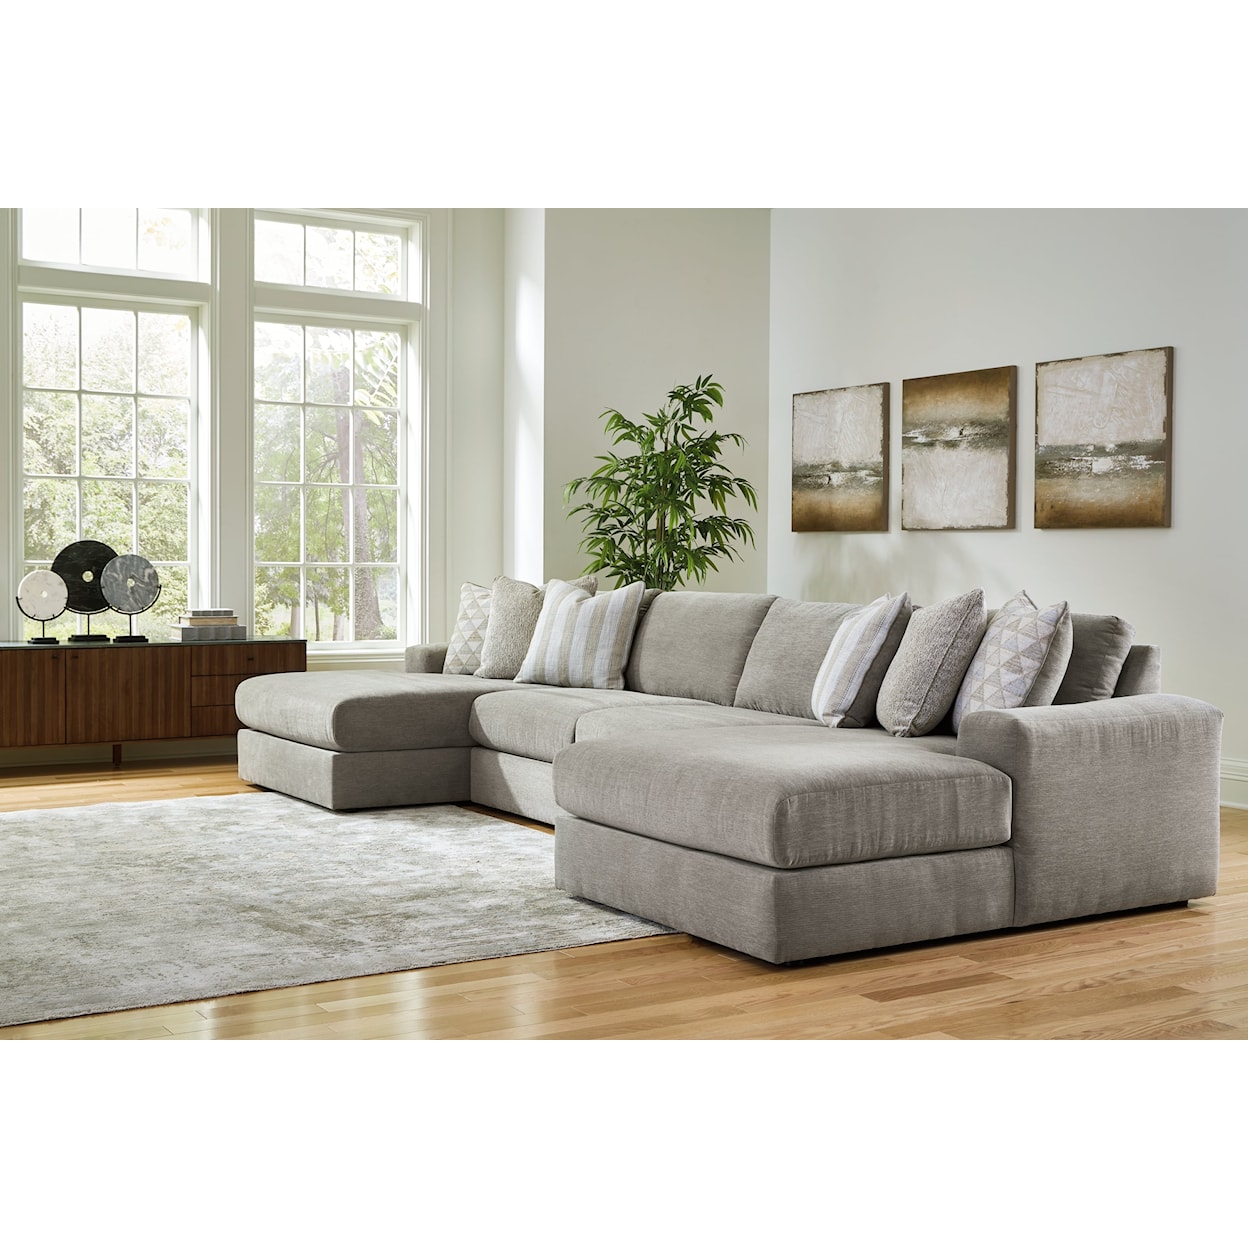 Benchcraft Avaliyah 4-Piece Double Chaise Sectional